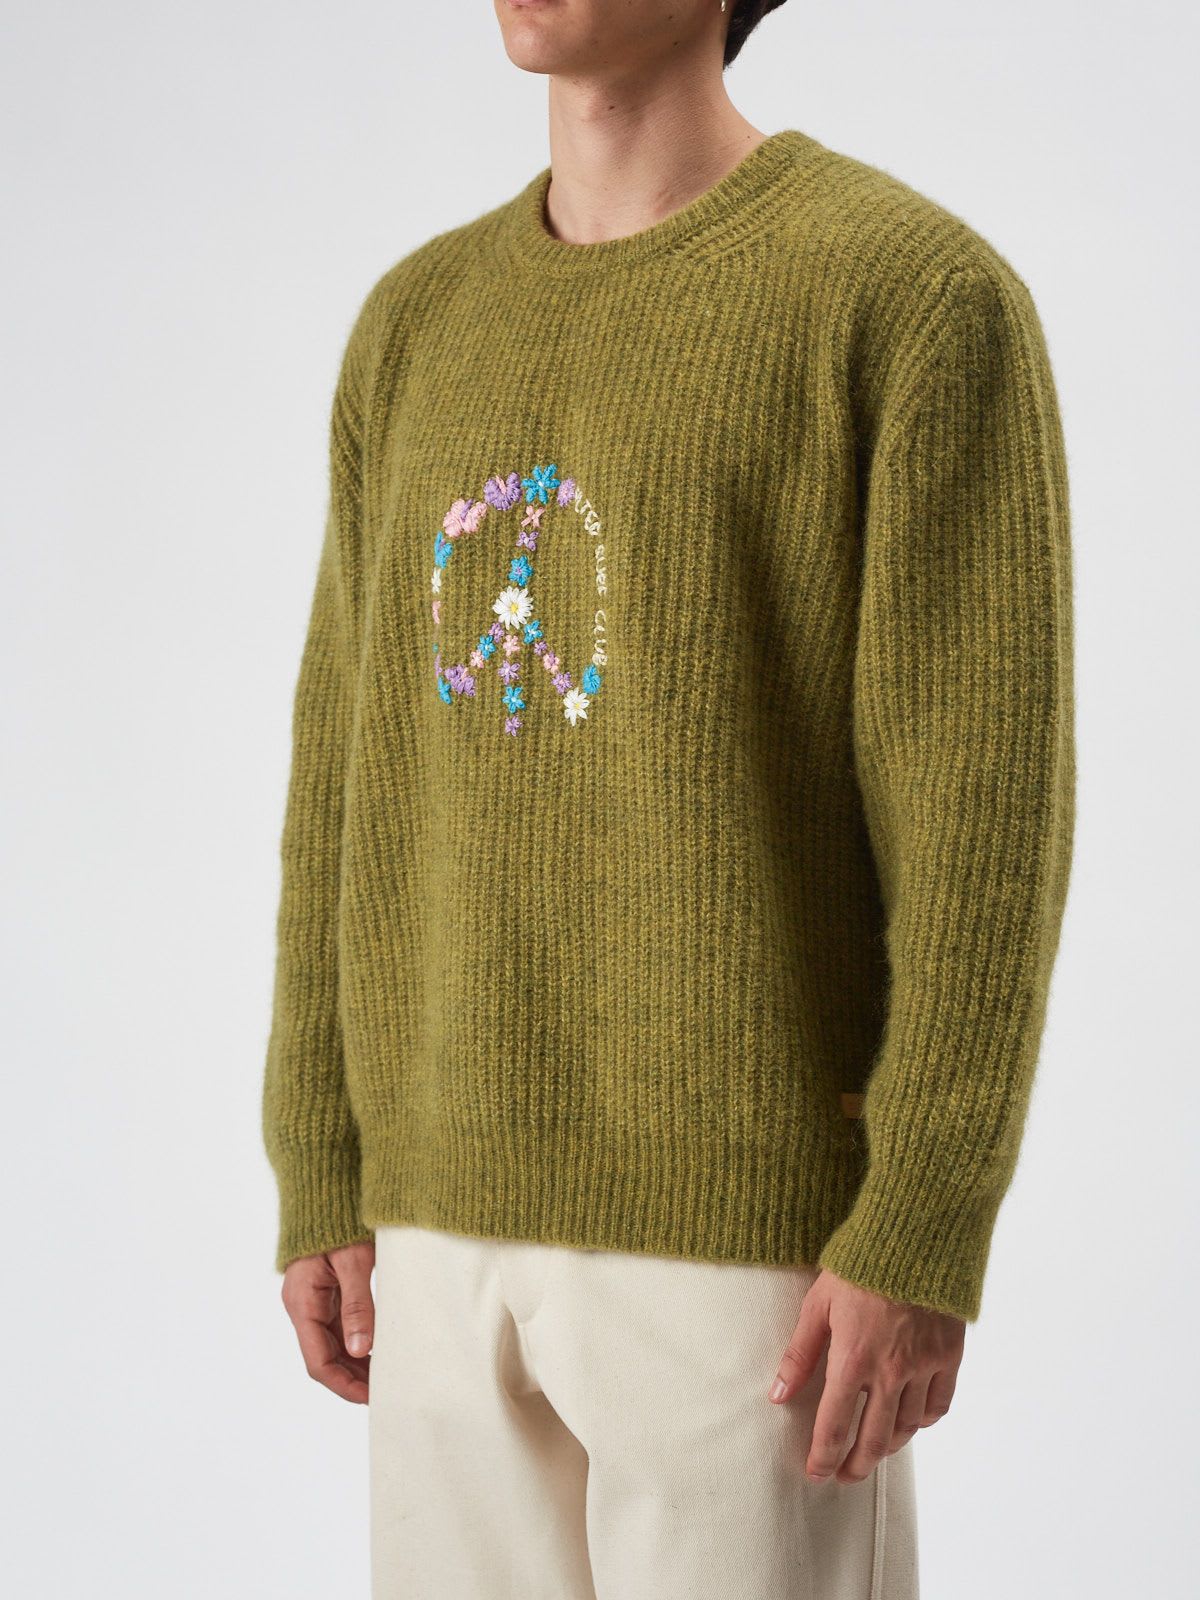 Silted Peaceful Sweater Handmade Flowers Embroidery